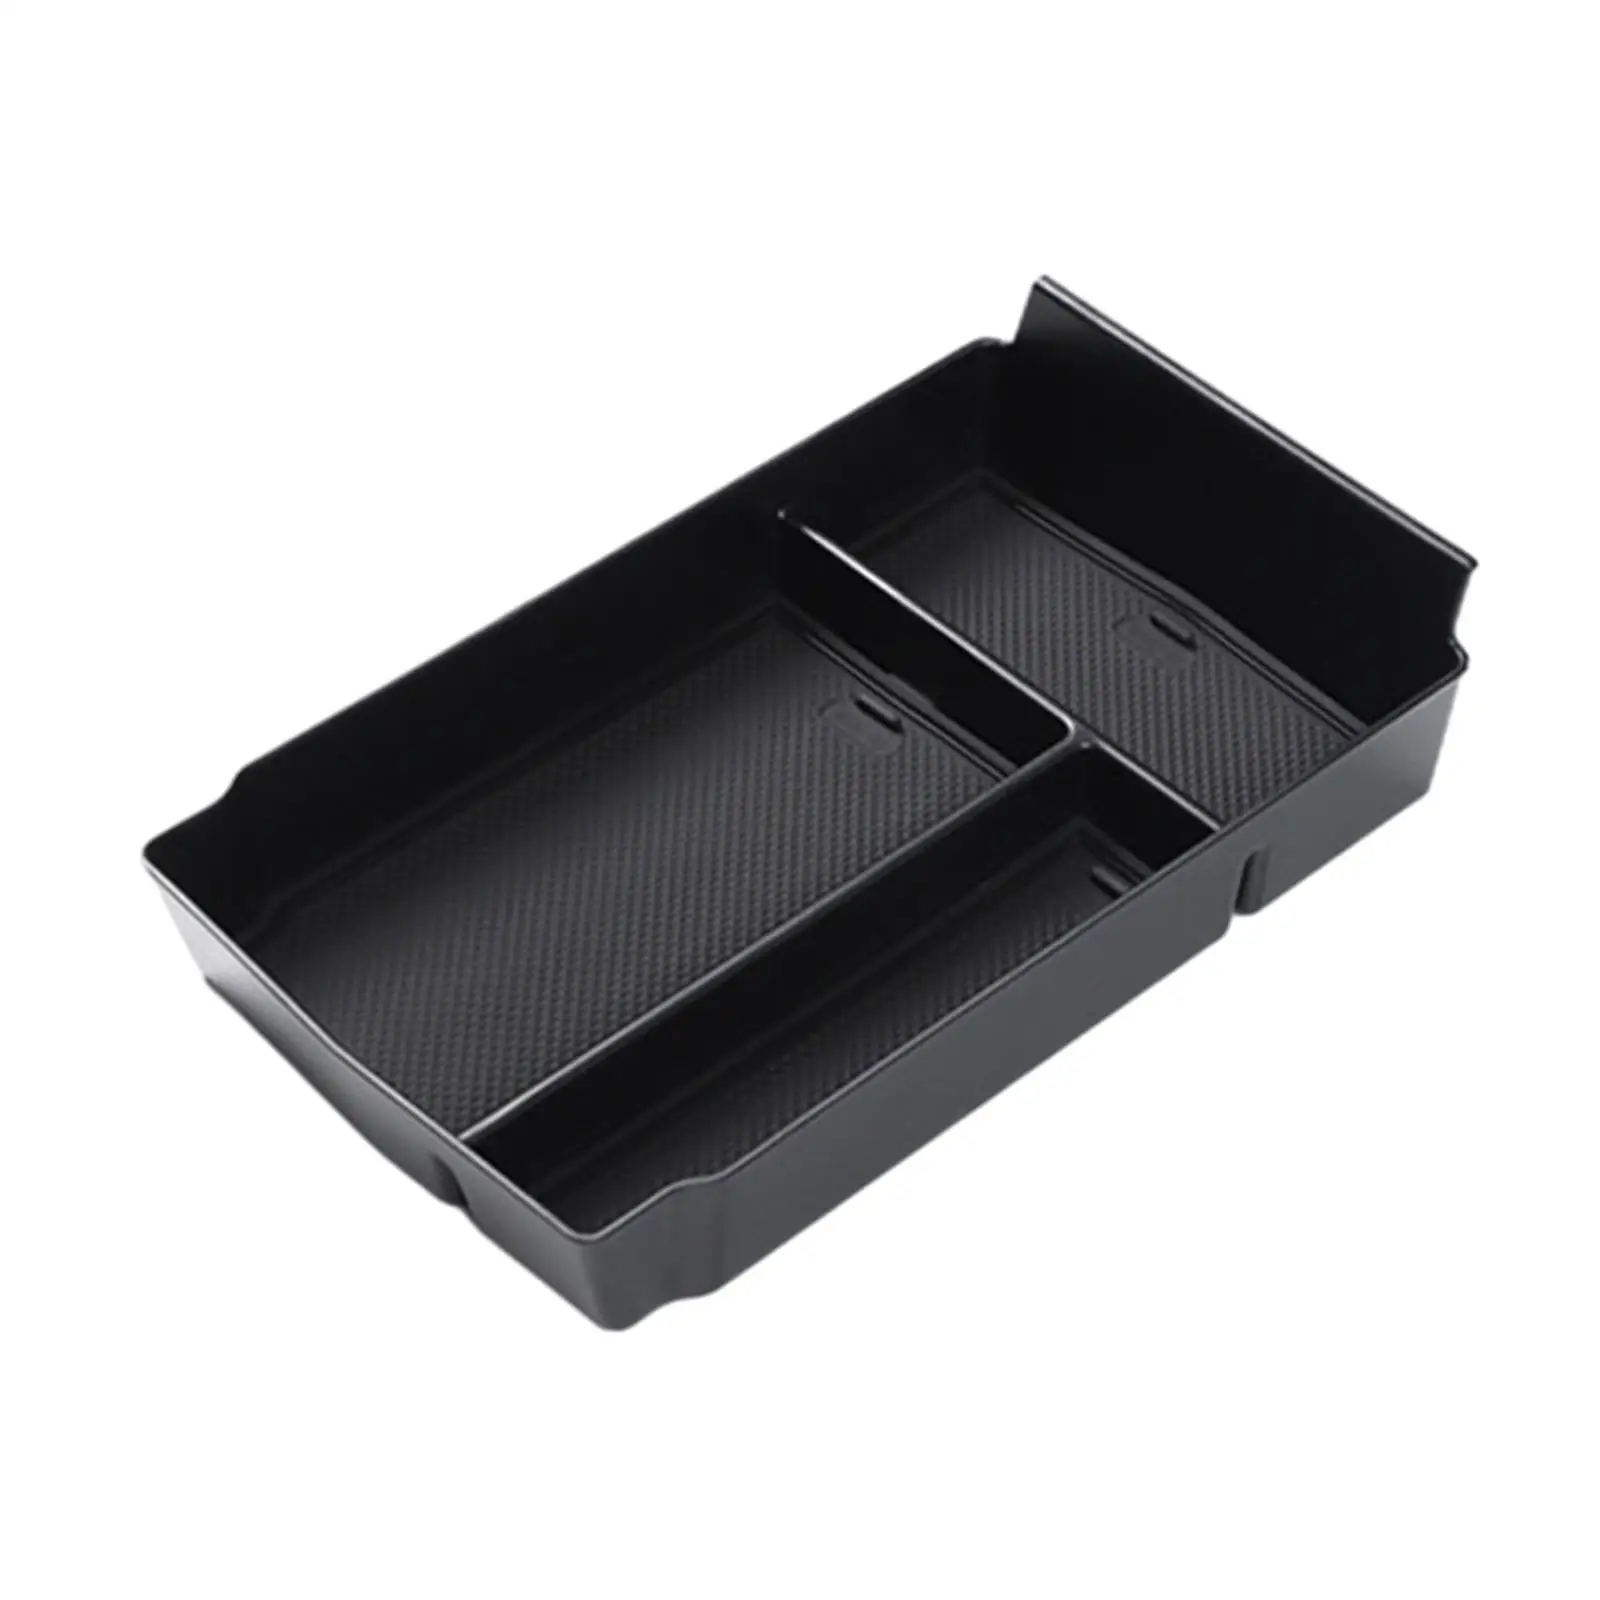 Center Console Organizer Tray Small Items Storage Easy to Install Spare Parts Replaces 3 Compartments for Honda CRV